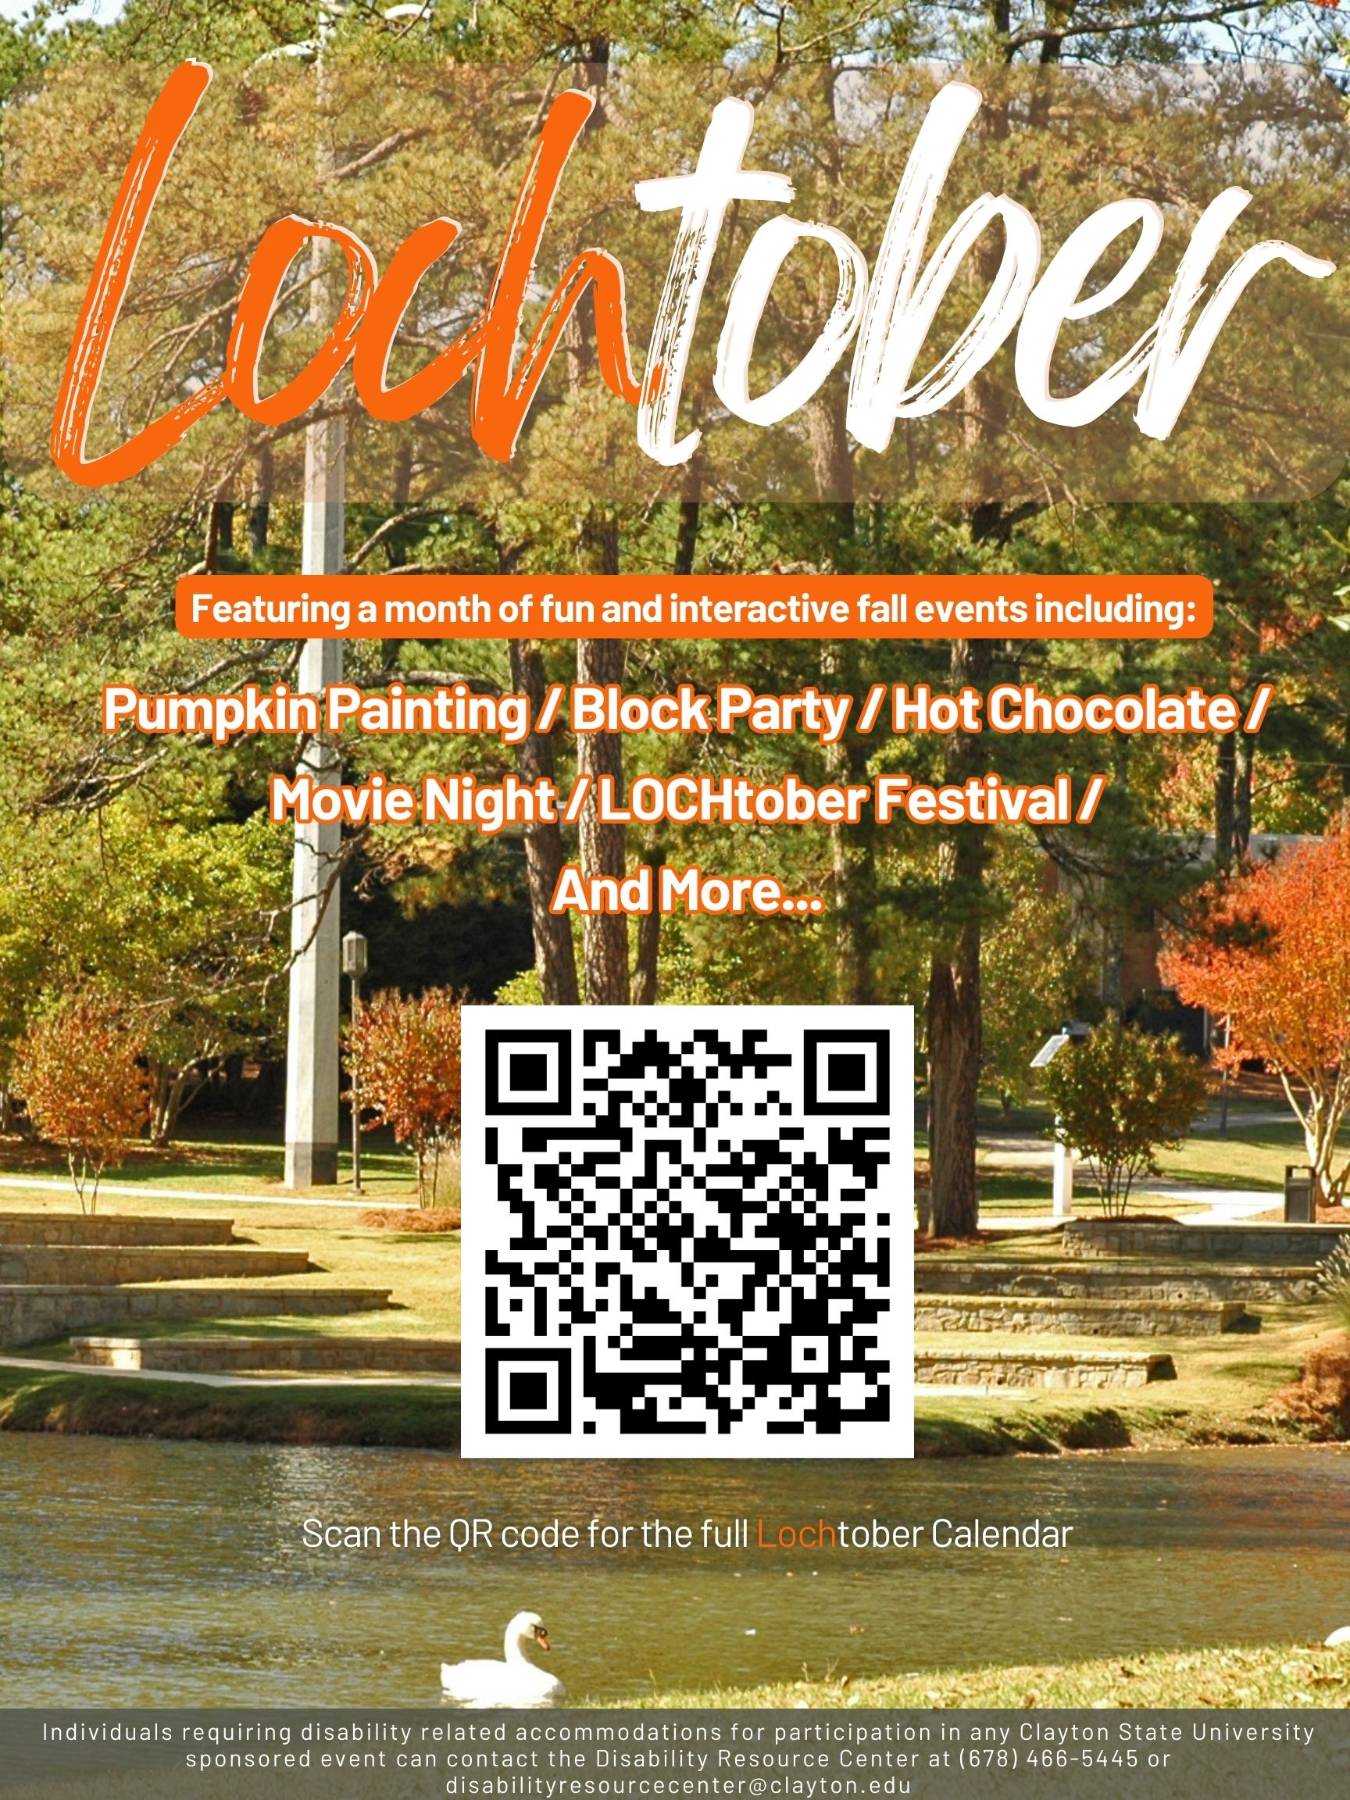 Lochtober Featuring a month of fun & interactive events: Image of QR code to link: clayton.edu/campus-life/lochtober